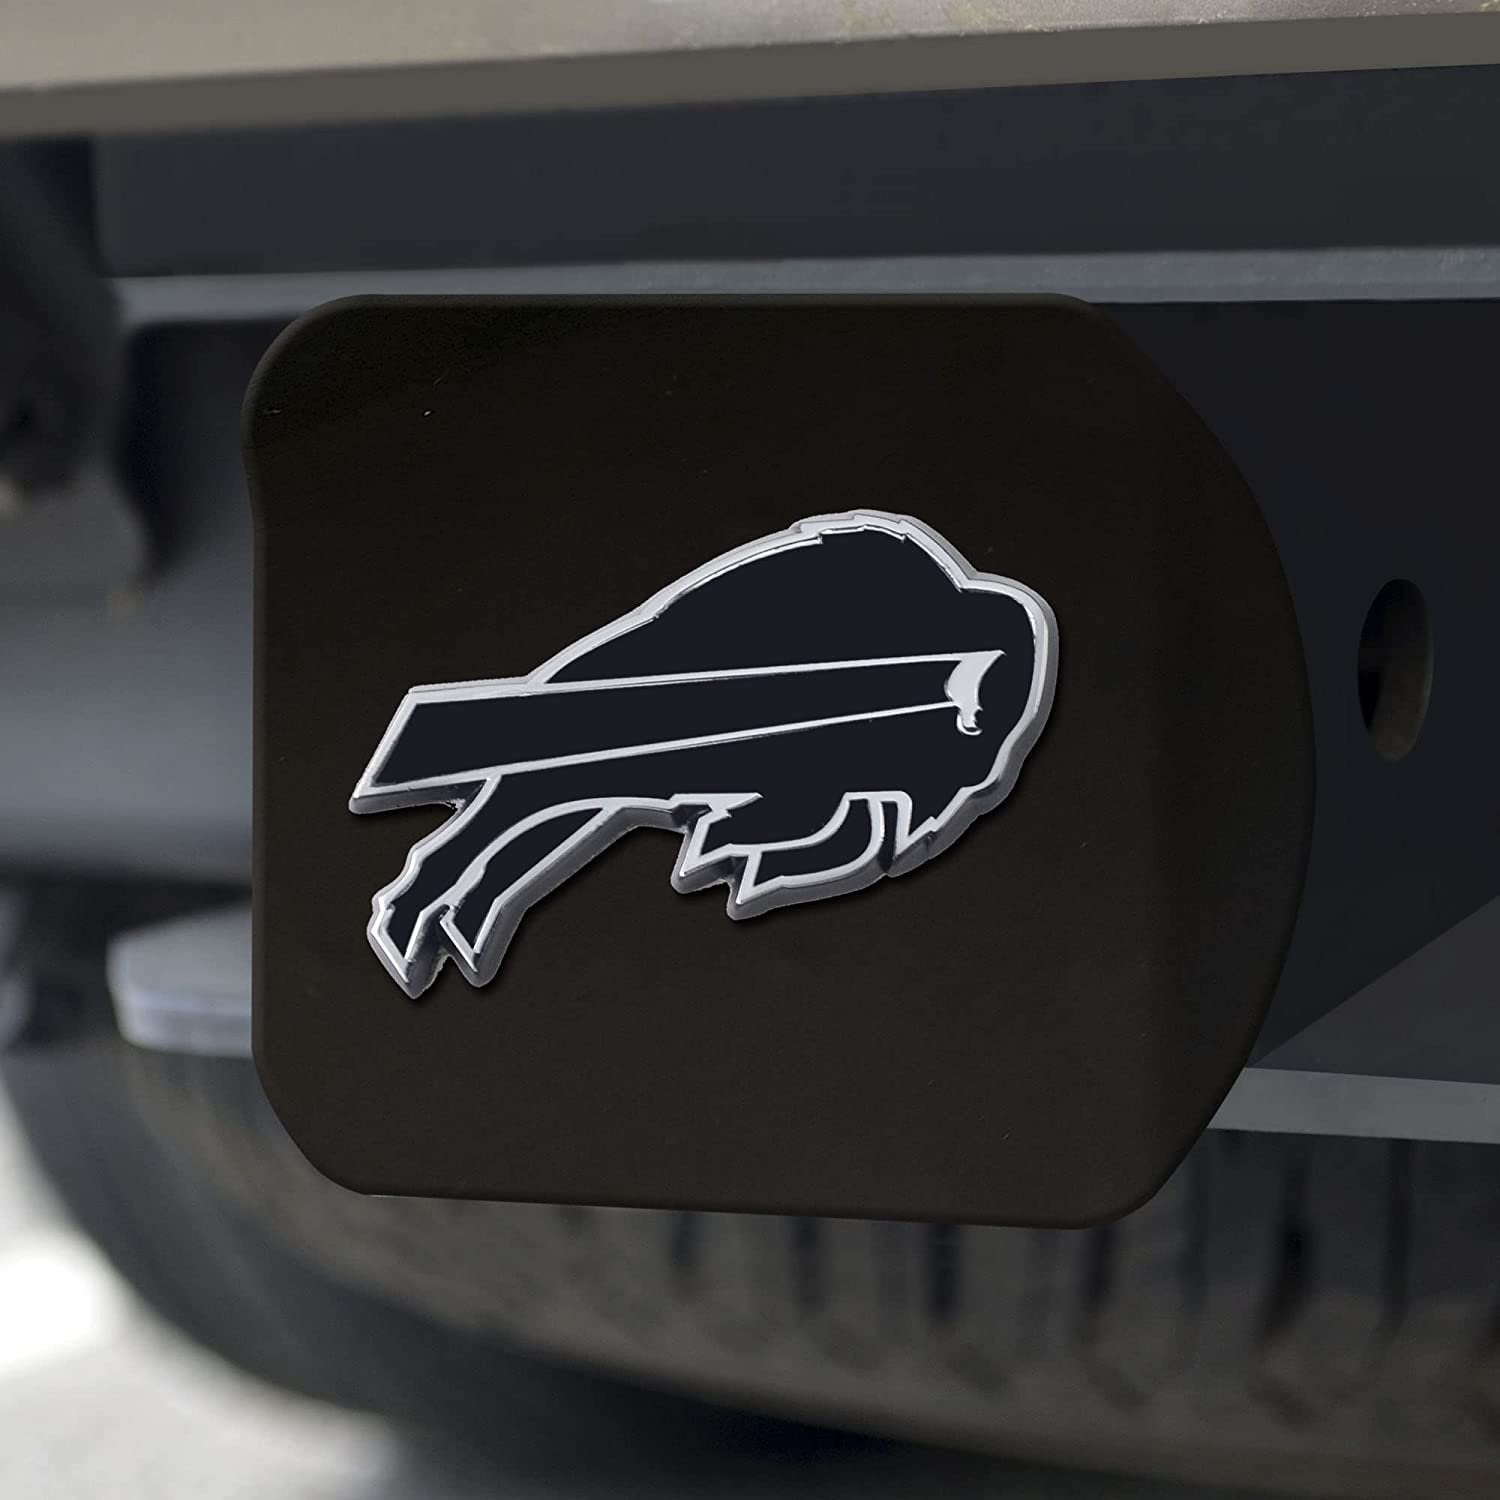 NFL Buffalo Bills Metal Hitch Cover, Black, 2" Square Type III Hitch Cover